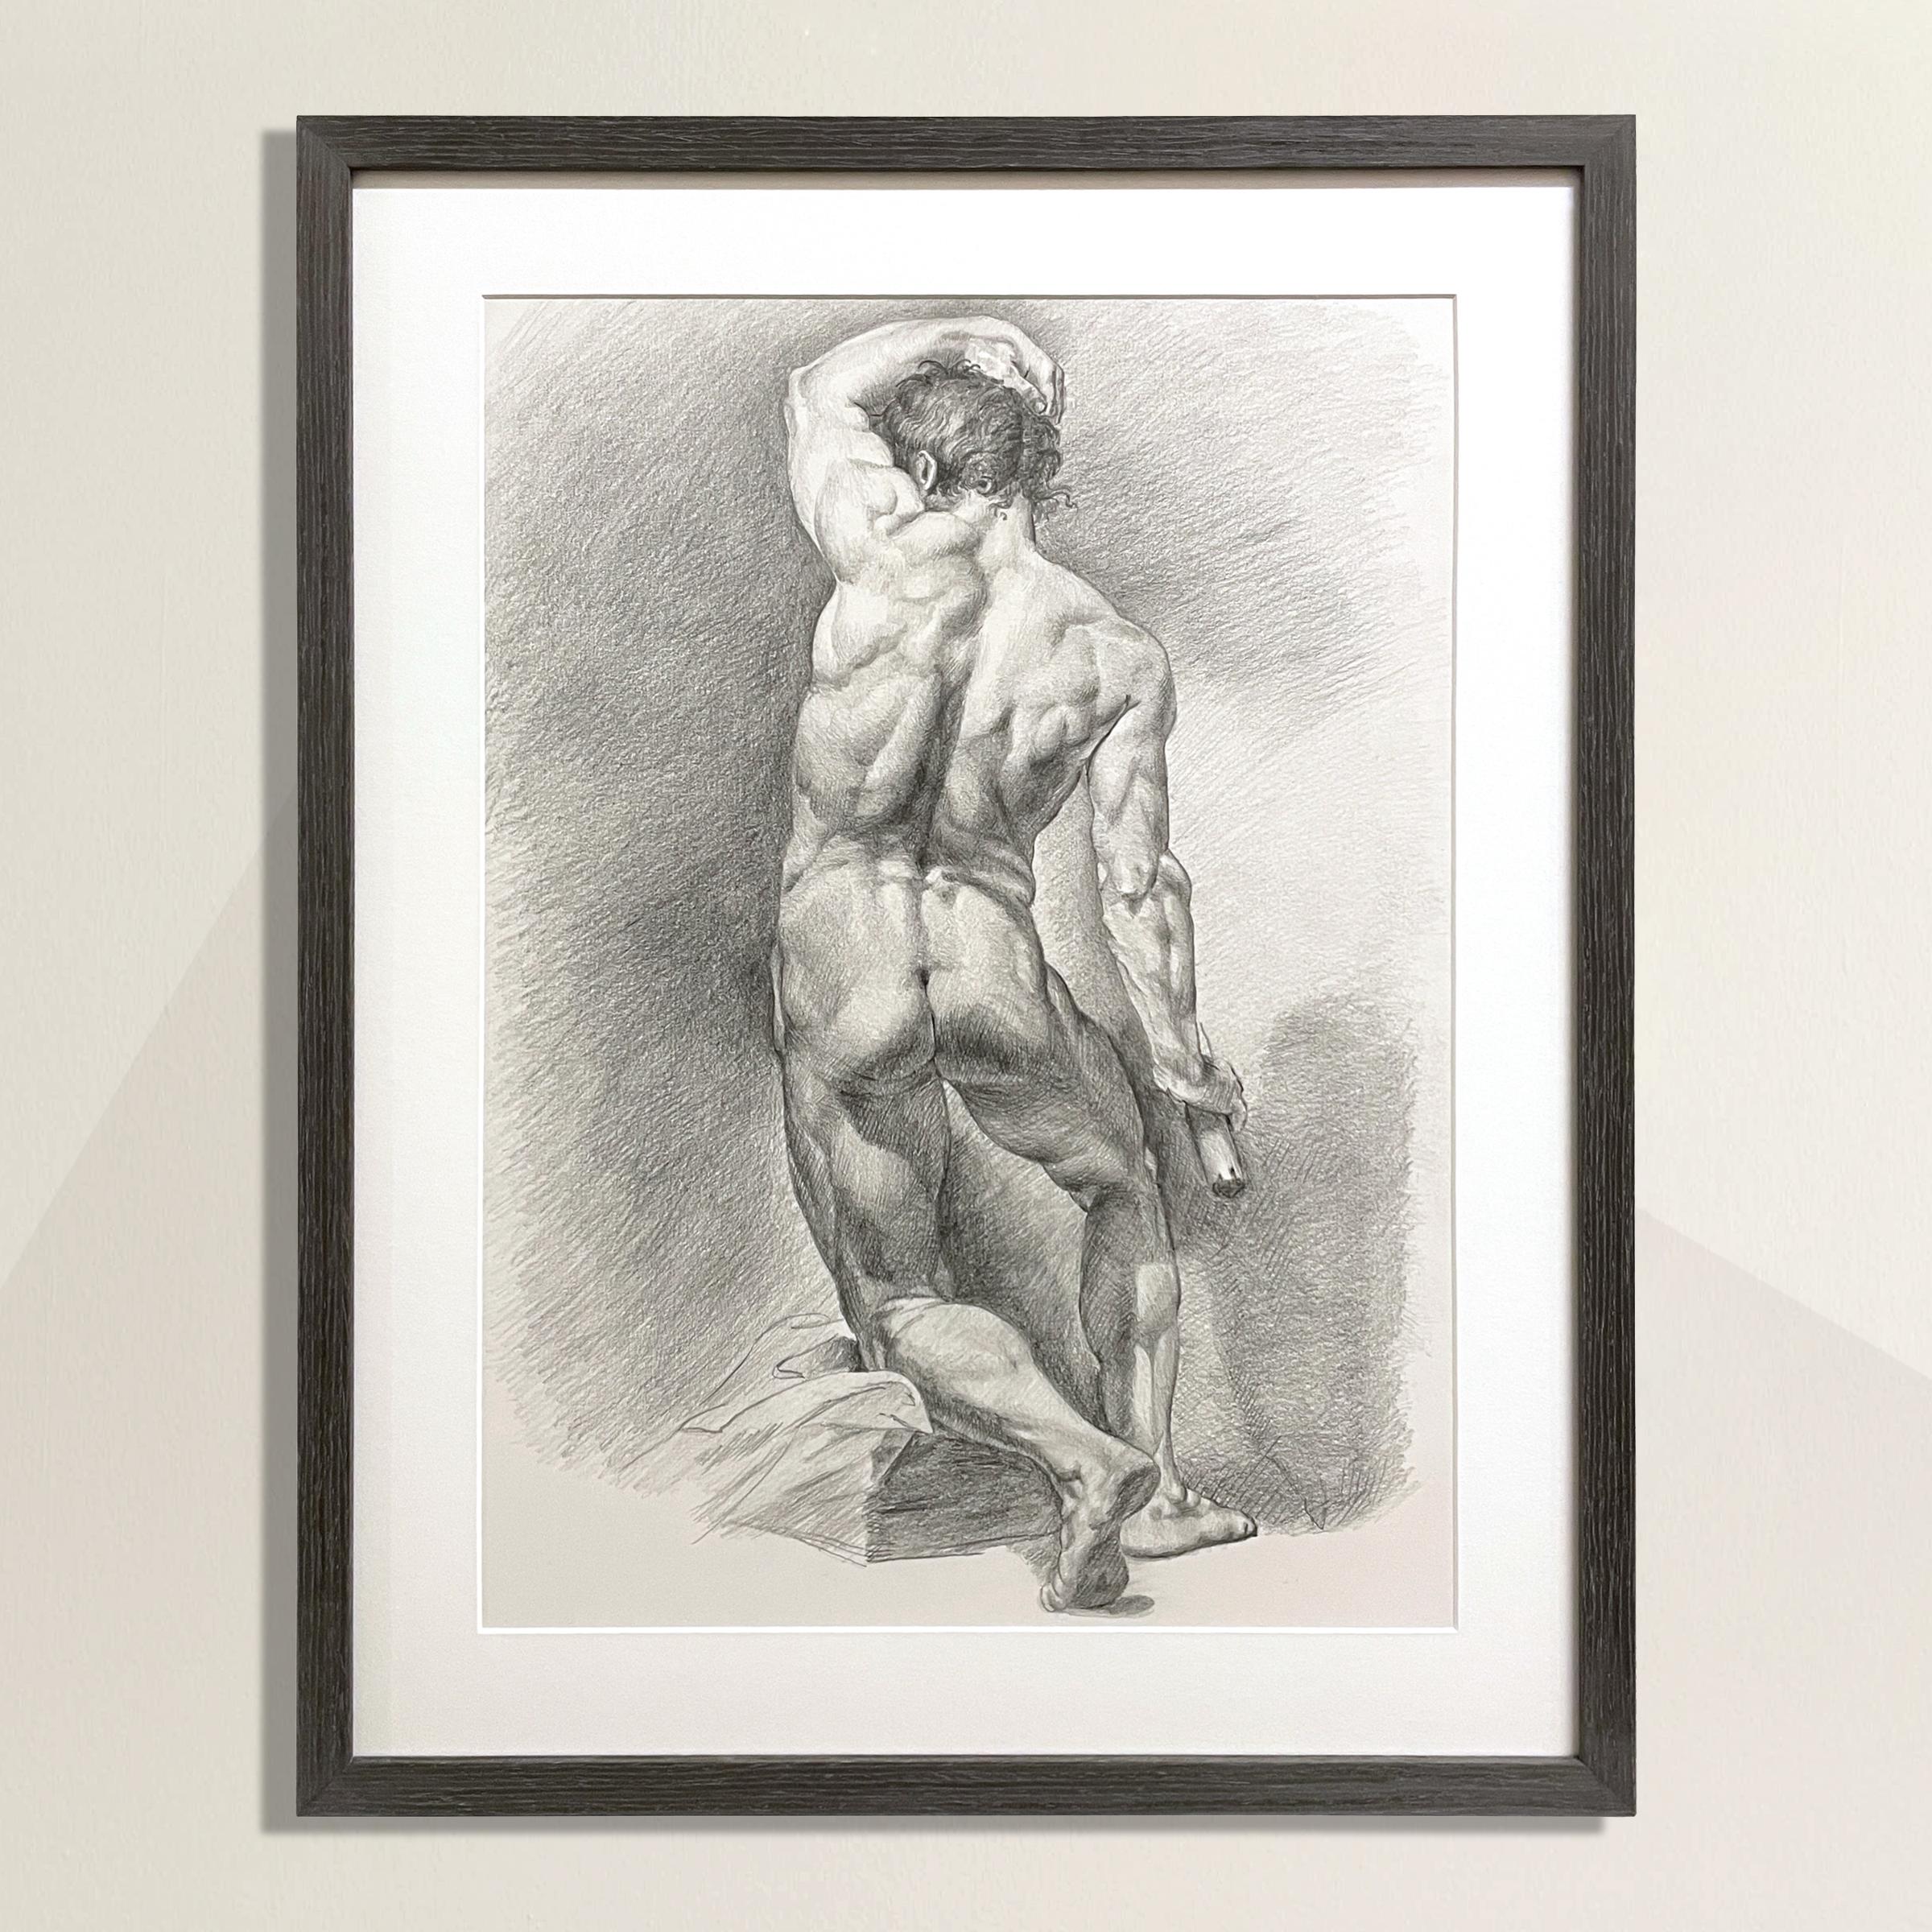 A stunning late 20th-century academic graphite-on-paper male figure drawing showcasing a skillful attention to musculature, highlights and shadows, and with a classical Renaissance-inspired sensibility. Framed in a new driftwood gray gallery frame